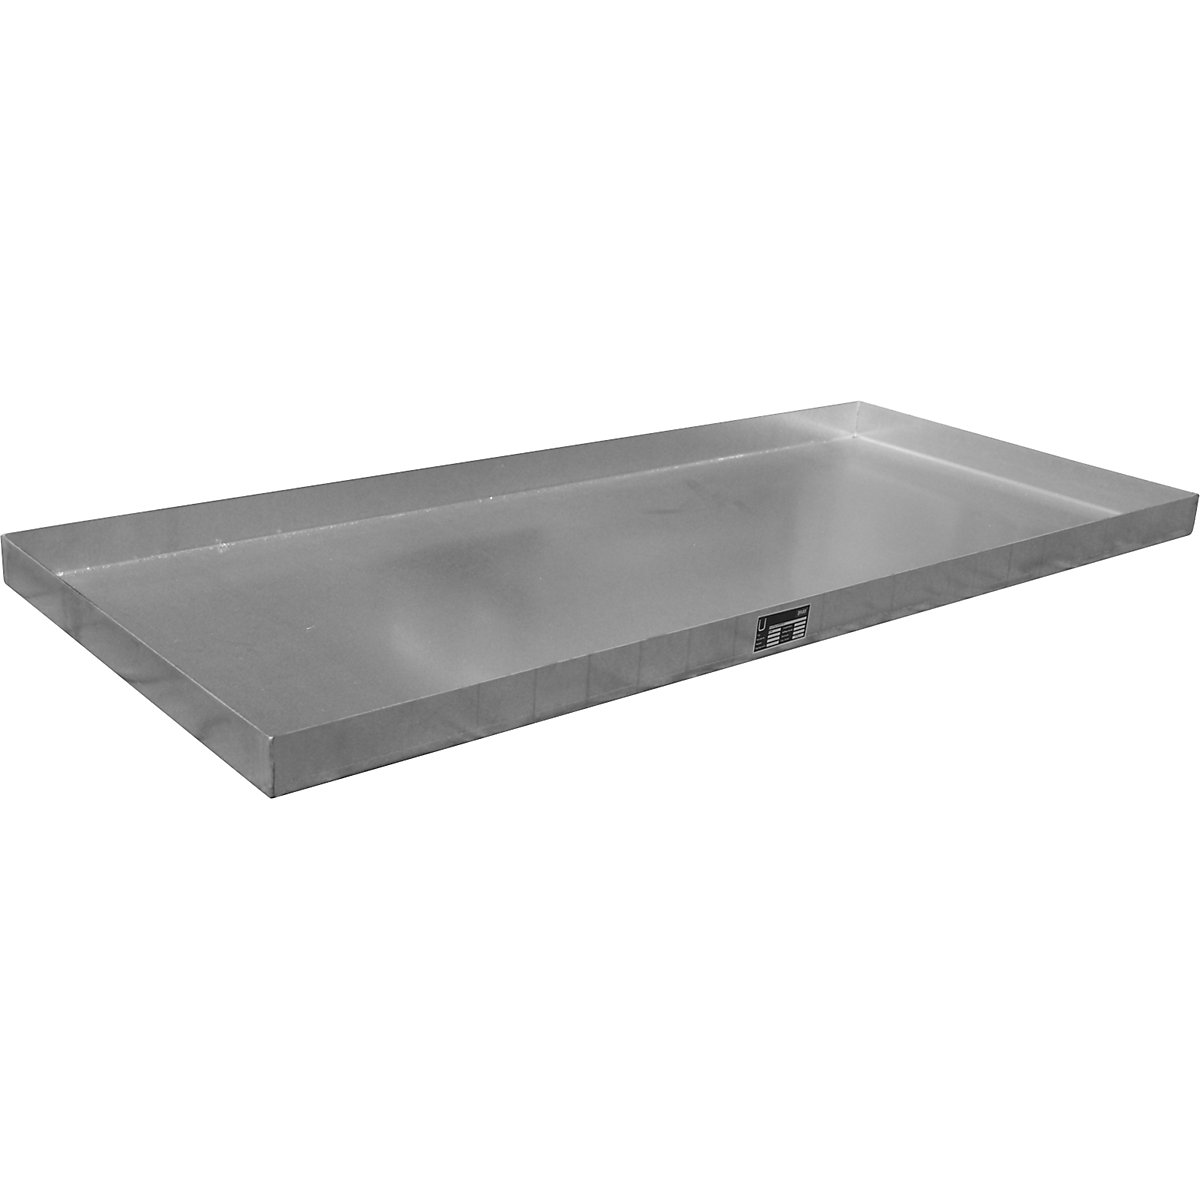 Stainless steel small container sump – eurokraft pro, with certification, 40 l, LxWxH 1390 x 600 x 60 mm-5